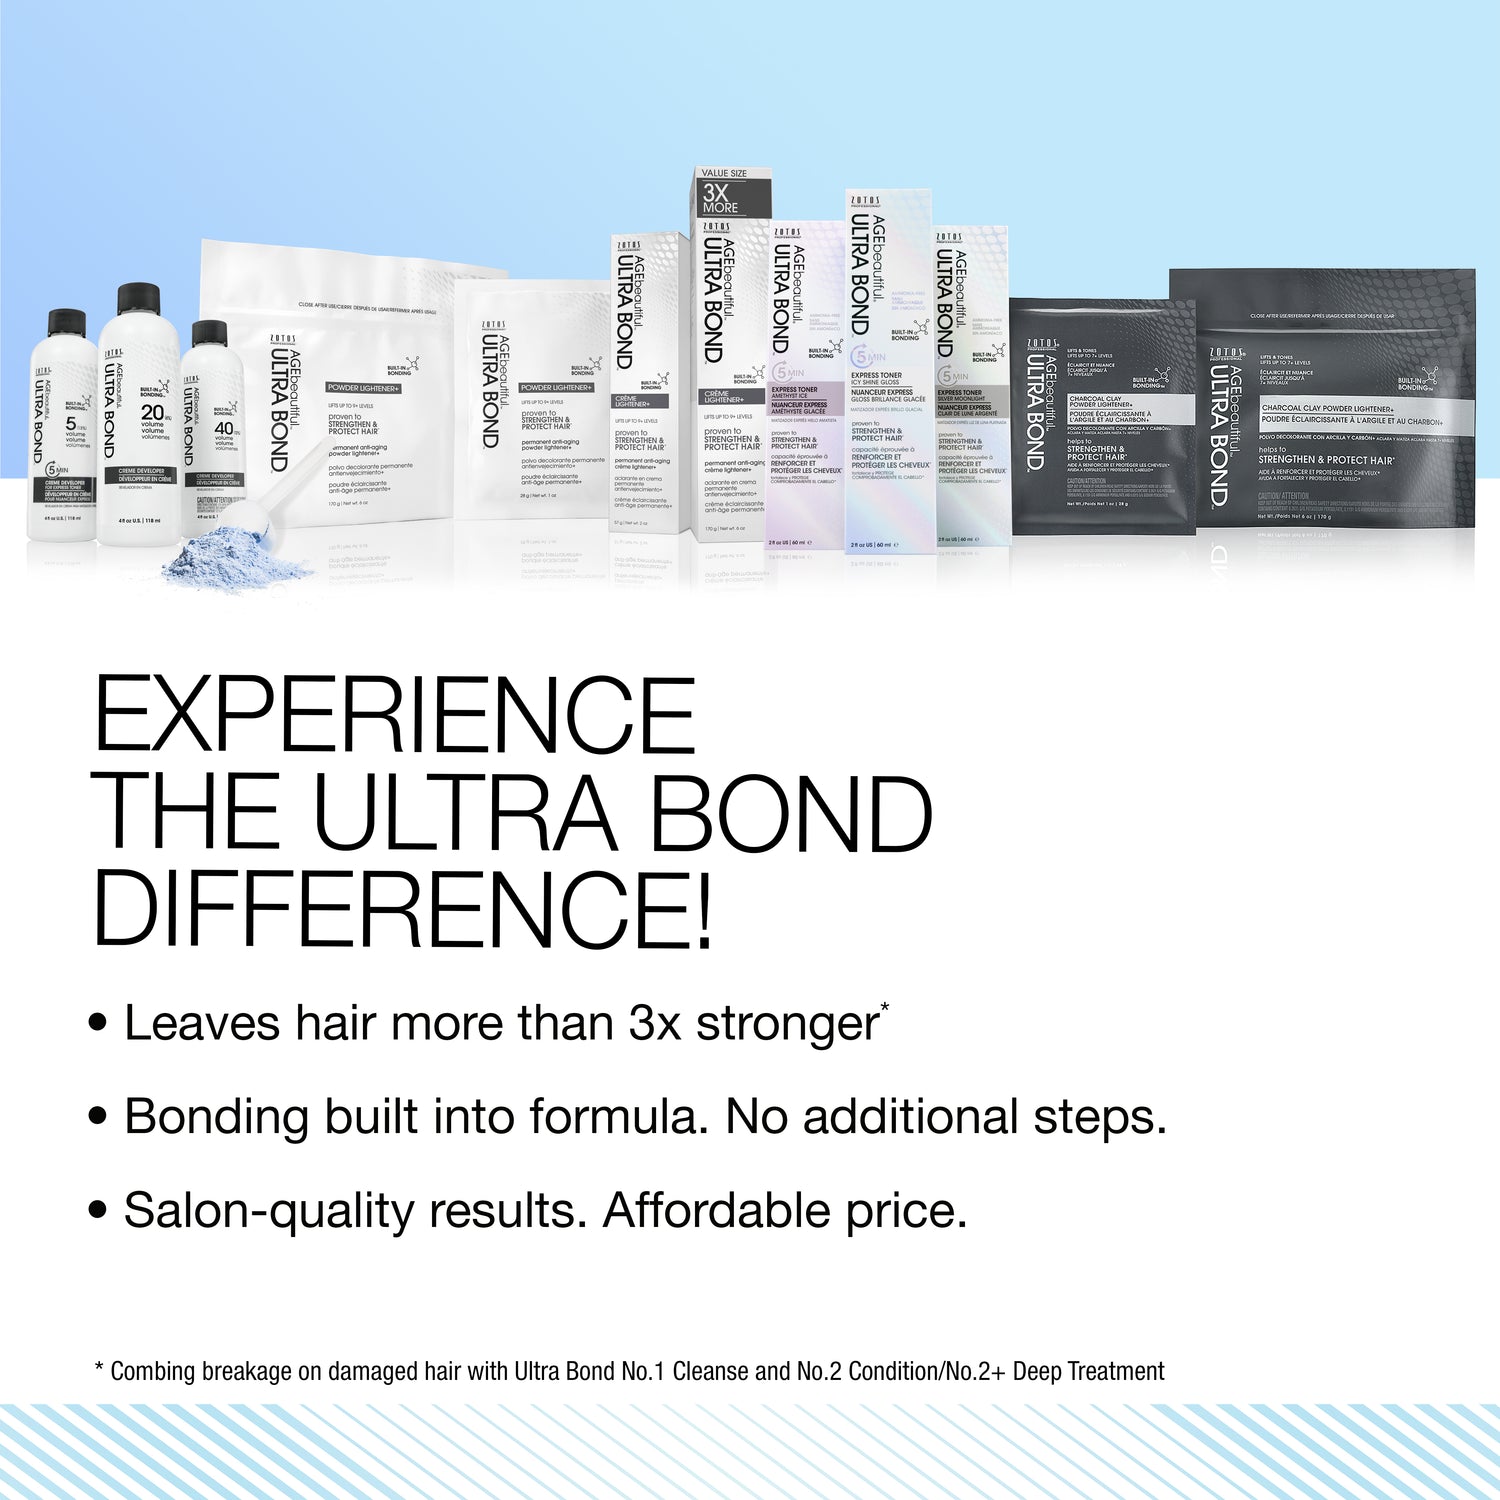 Ultra Bond Line: Leaves hair more than 3x stronger, bonding built into formula. Salon quality-results, affordable price.